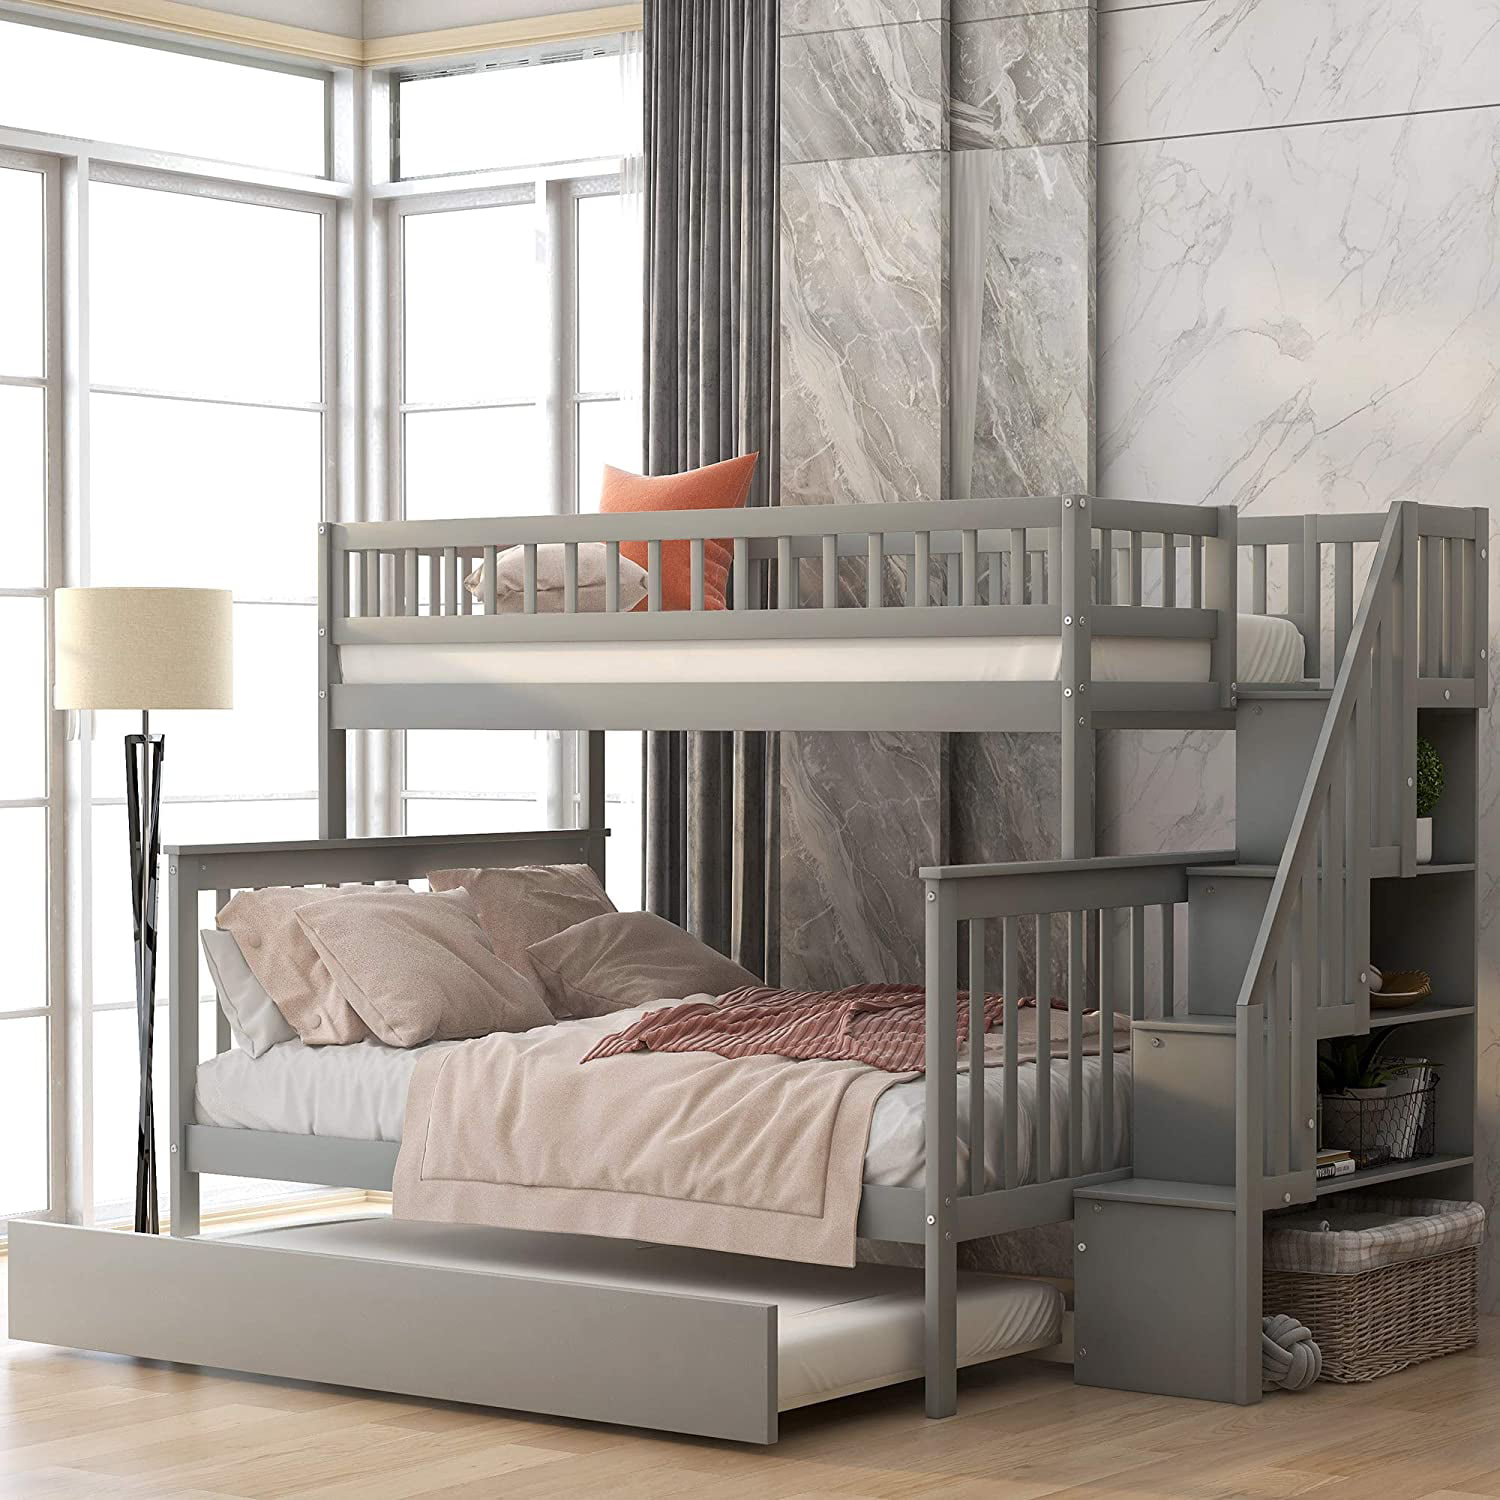 Piscis Bunk Bed Beds Twin Over, Bunk Beds Twin Over Full With Trundle And Stairs